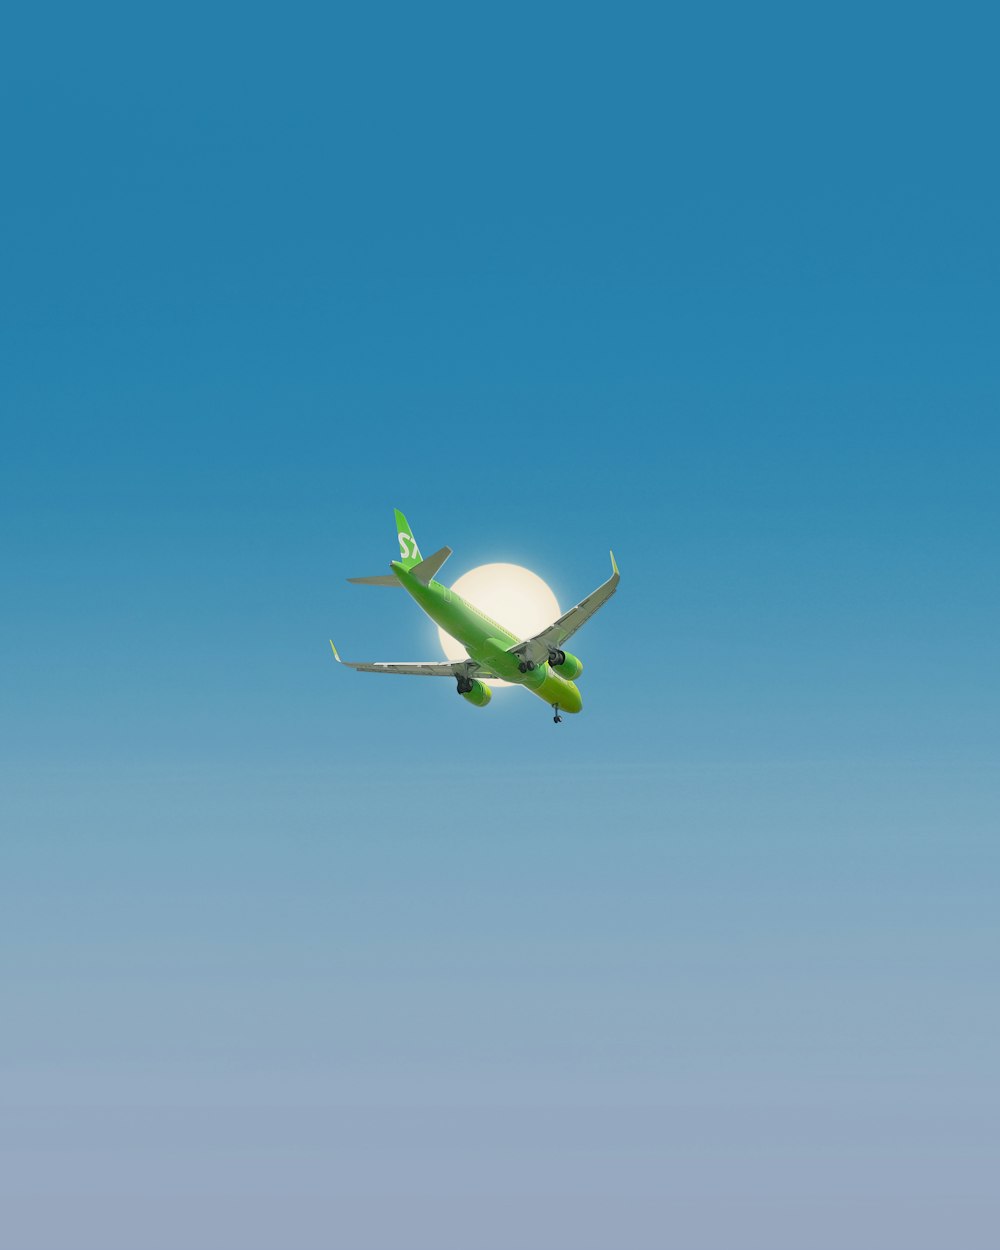 white and green airplane flying under blue sky during daytime